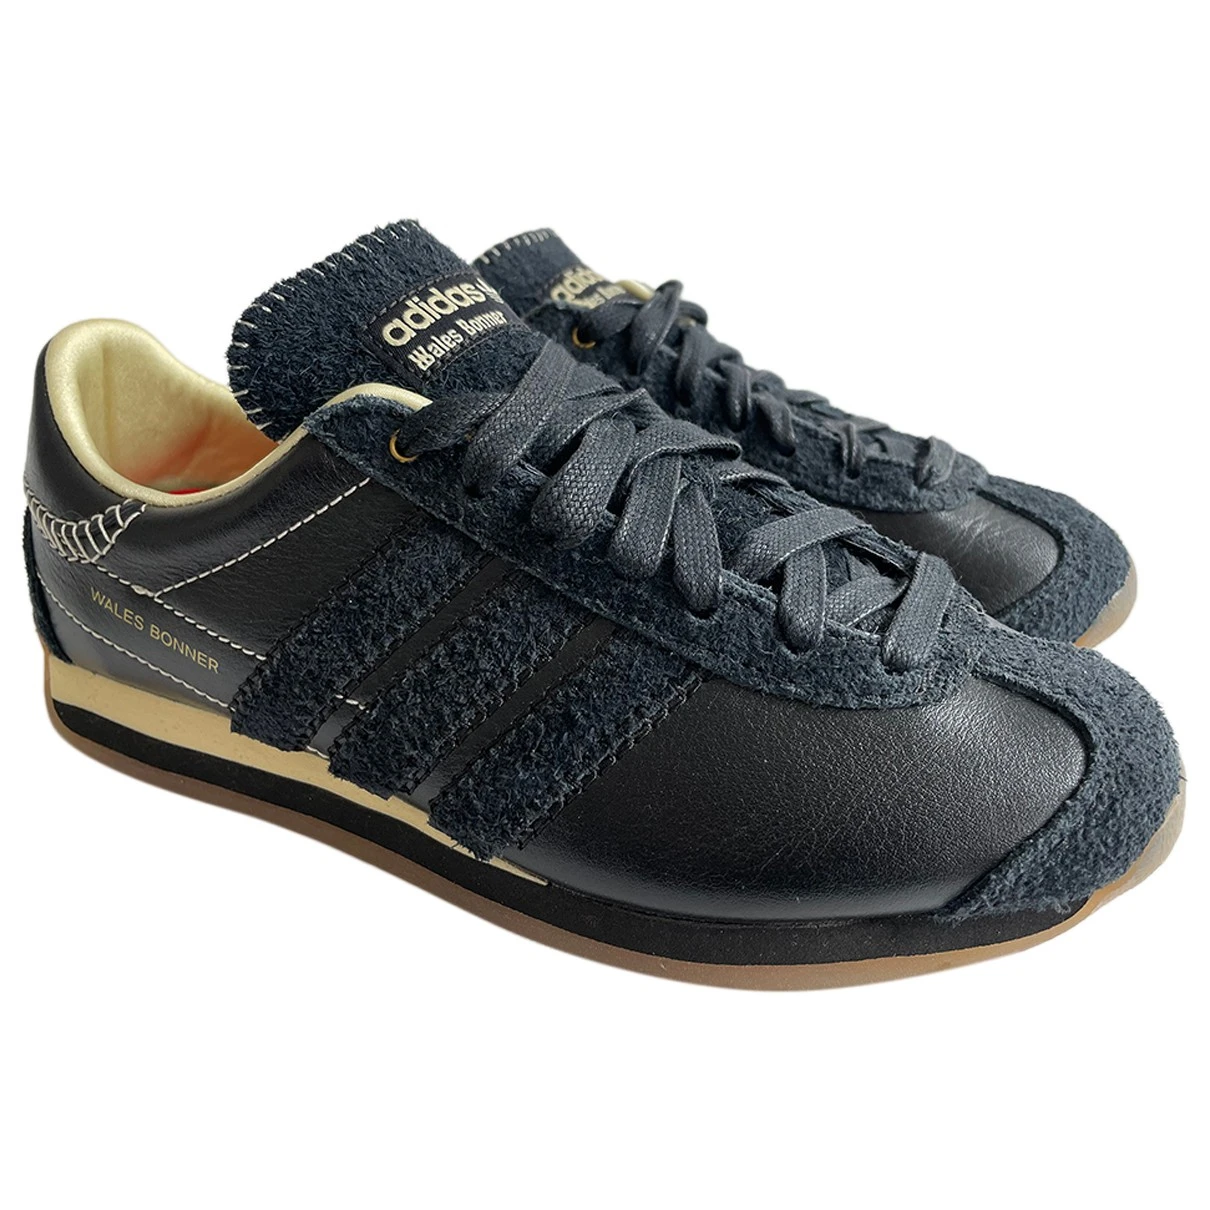 Pre-owned Wales Bonner Leather Trainers In Black